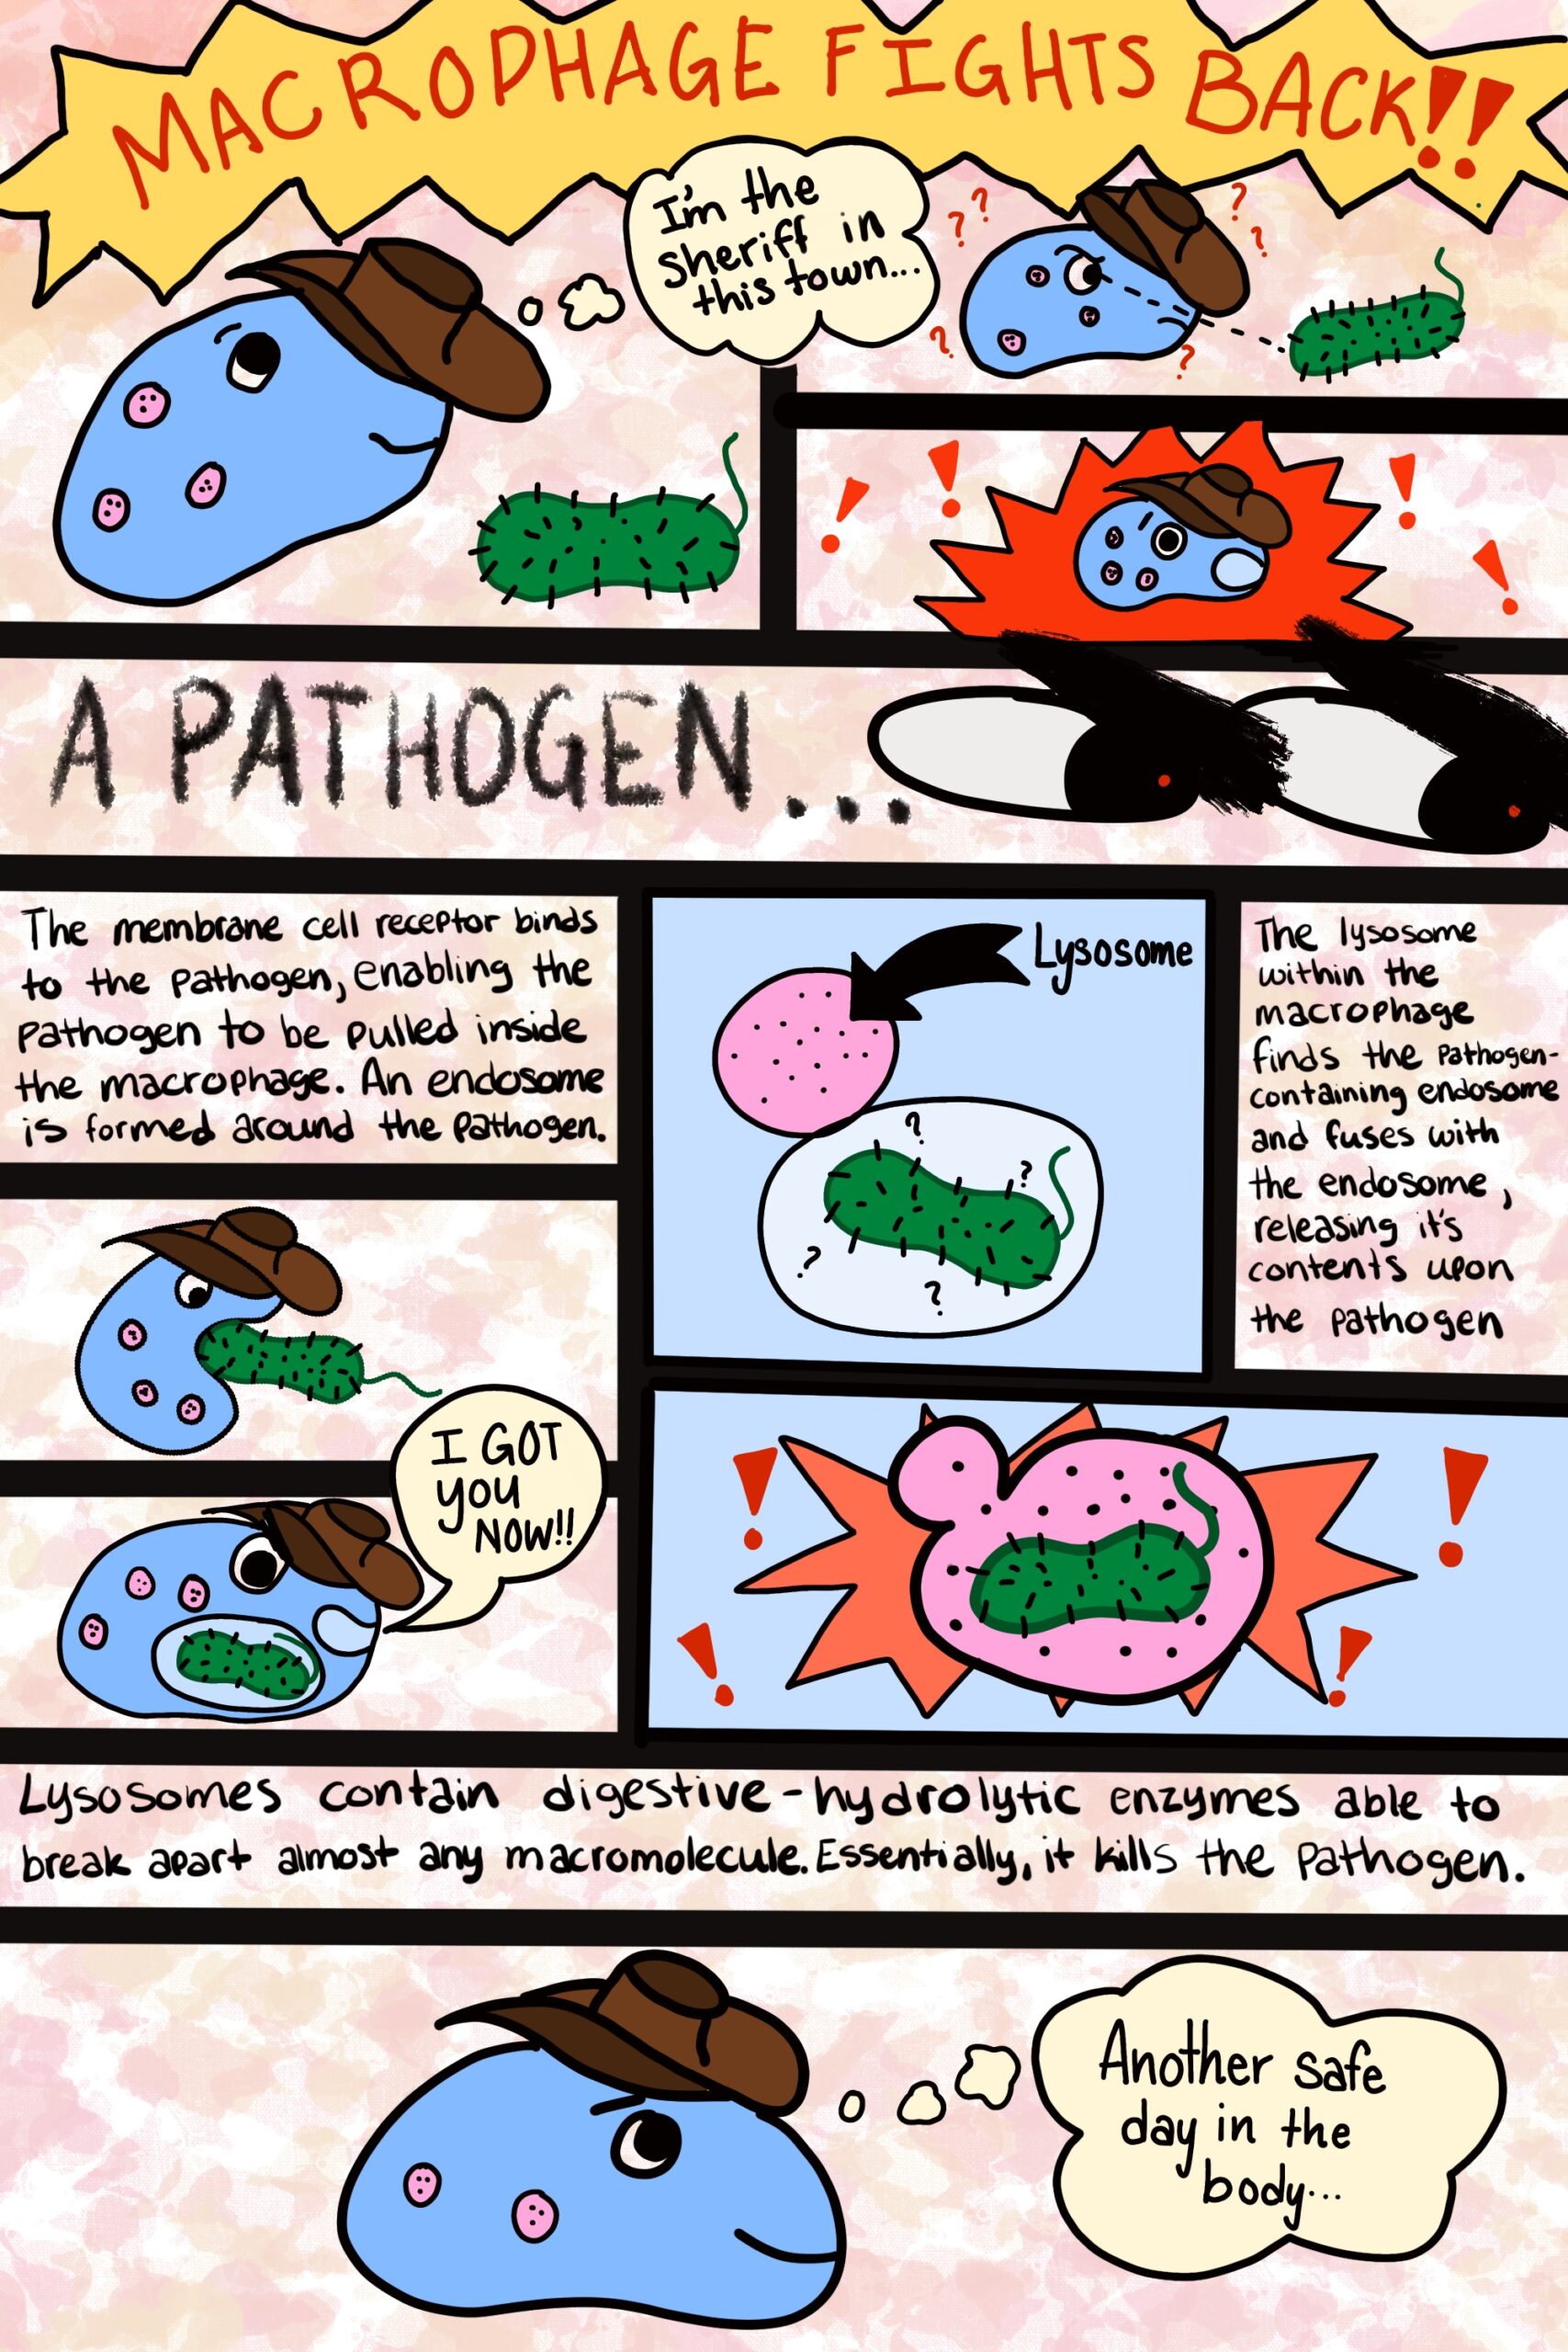 A Comic Strip on Macrophages!